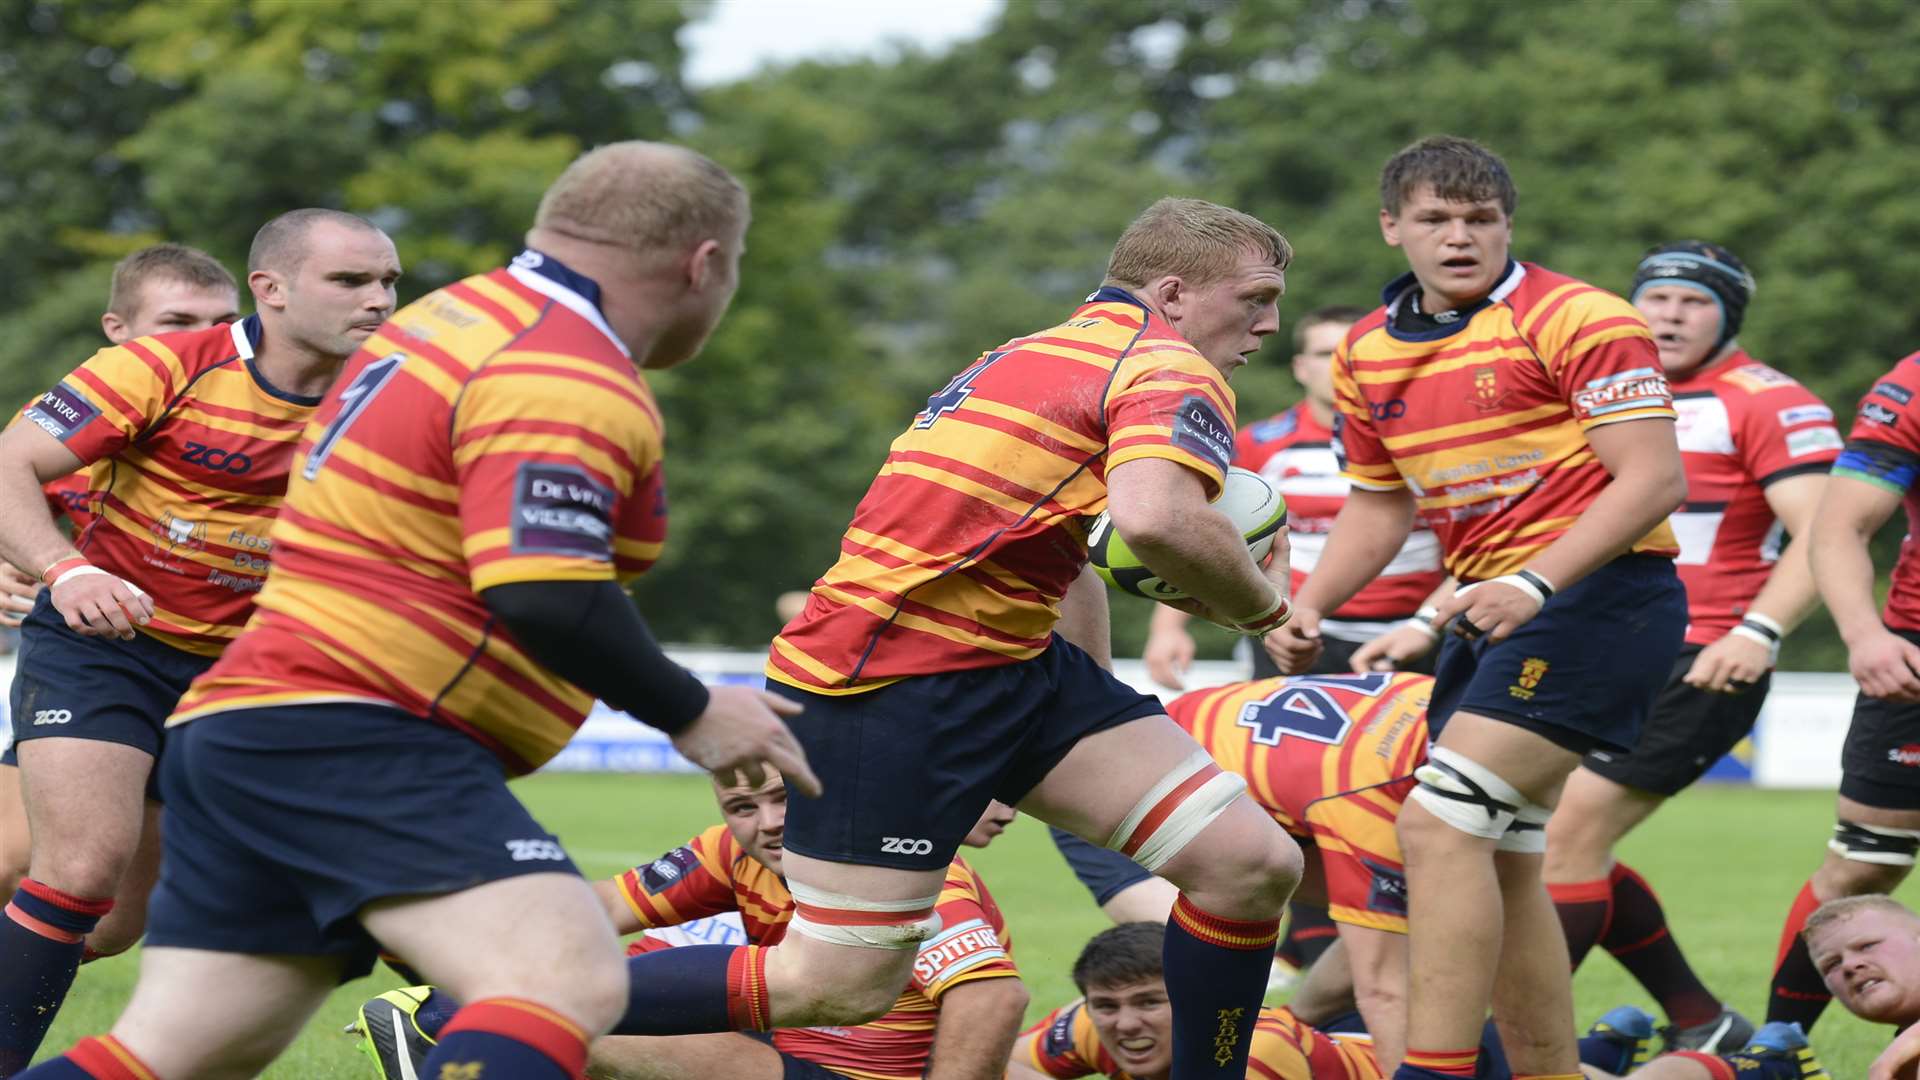 medway-rugby-club-receive-a-reduction-in-their-punishment-from-the-rfu